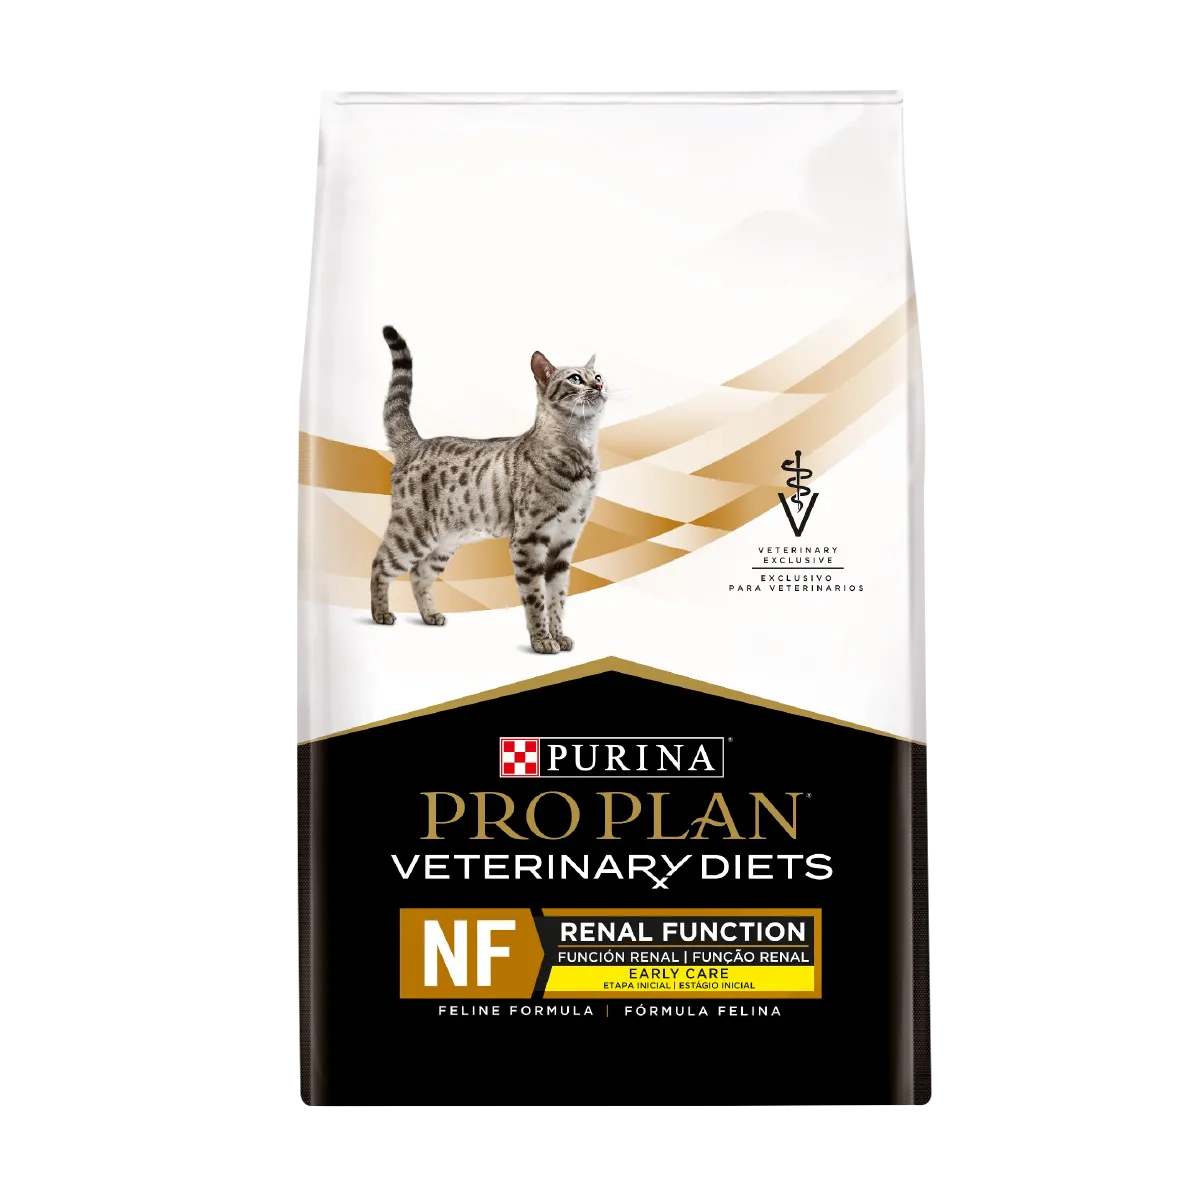 purina-pro-plan-veterinay-diets-cat-nf-renal-function-early-care